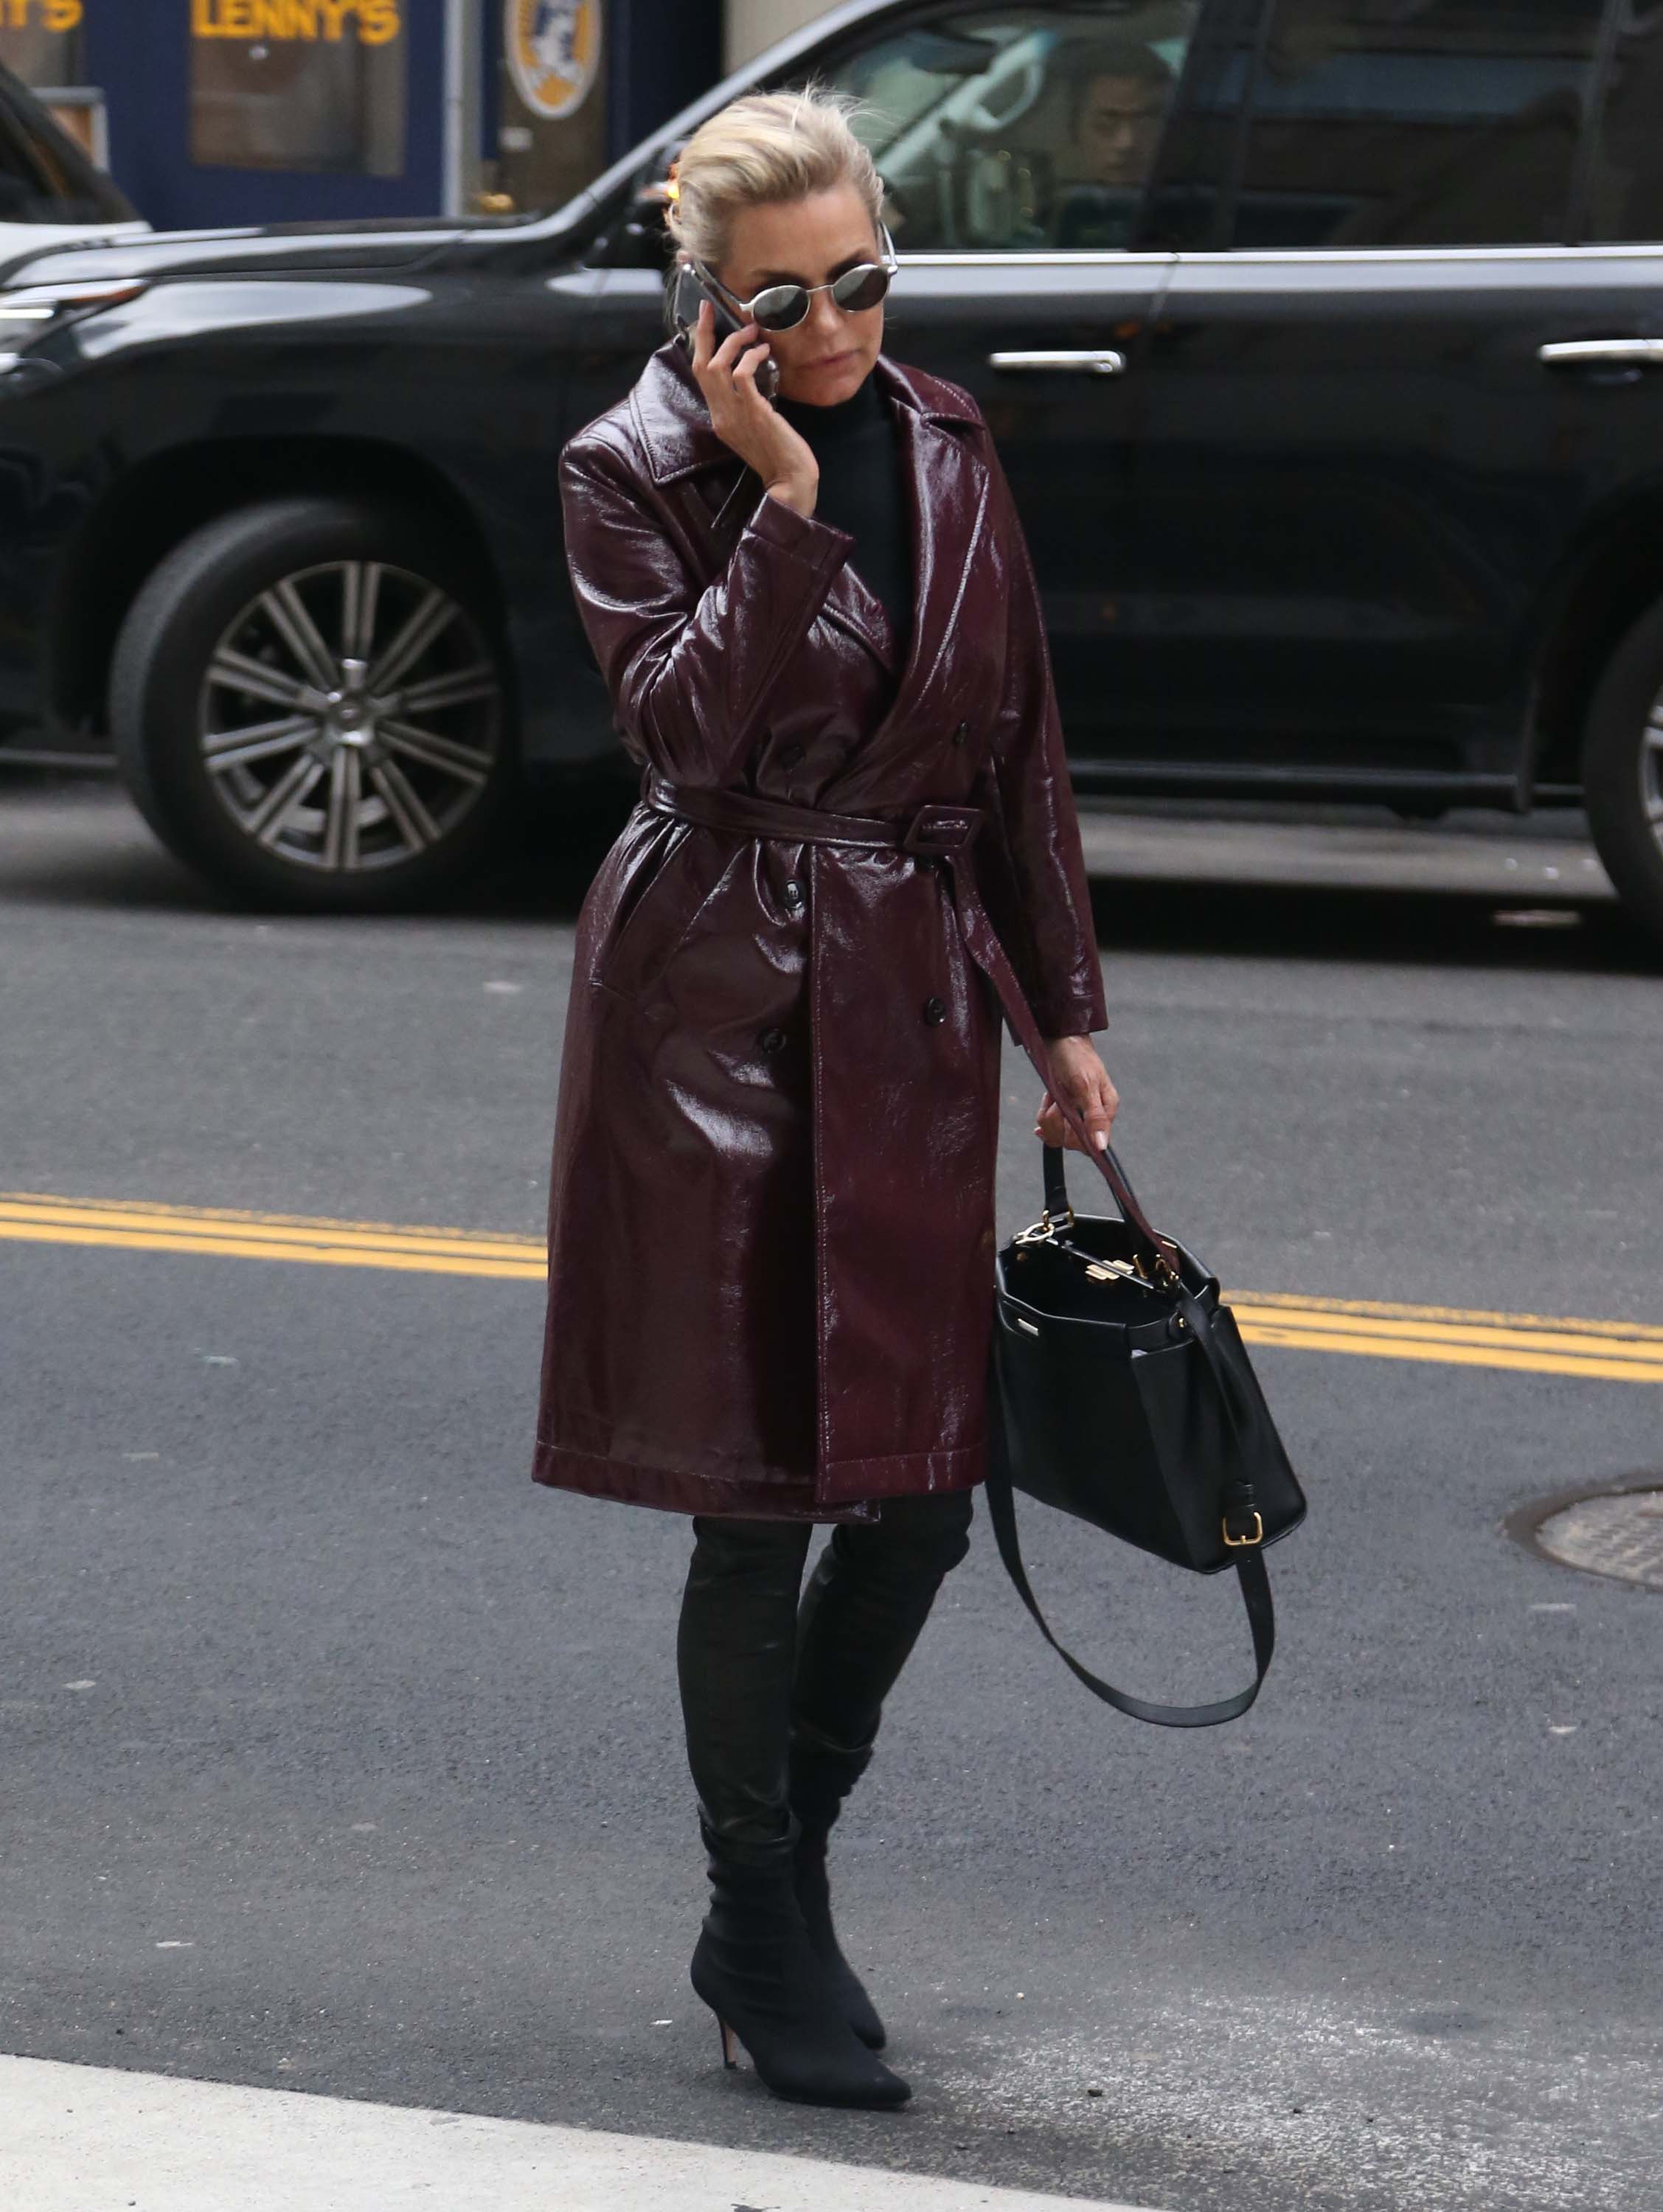 Yolanda Hadid out and about in New York